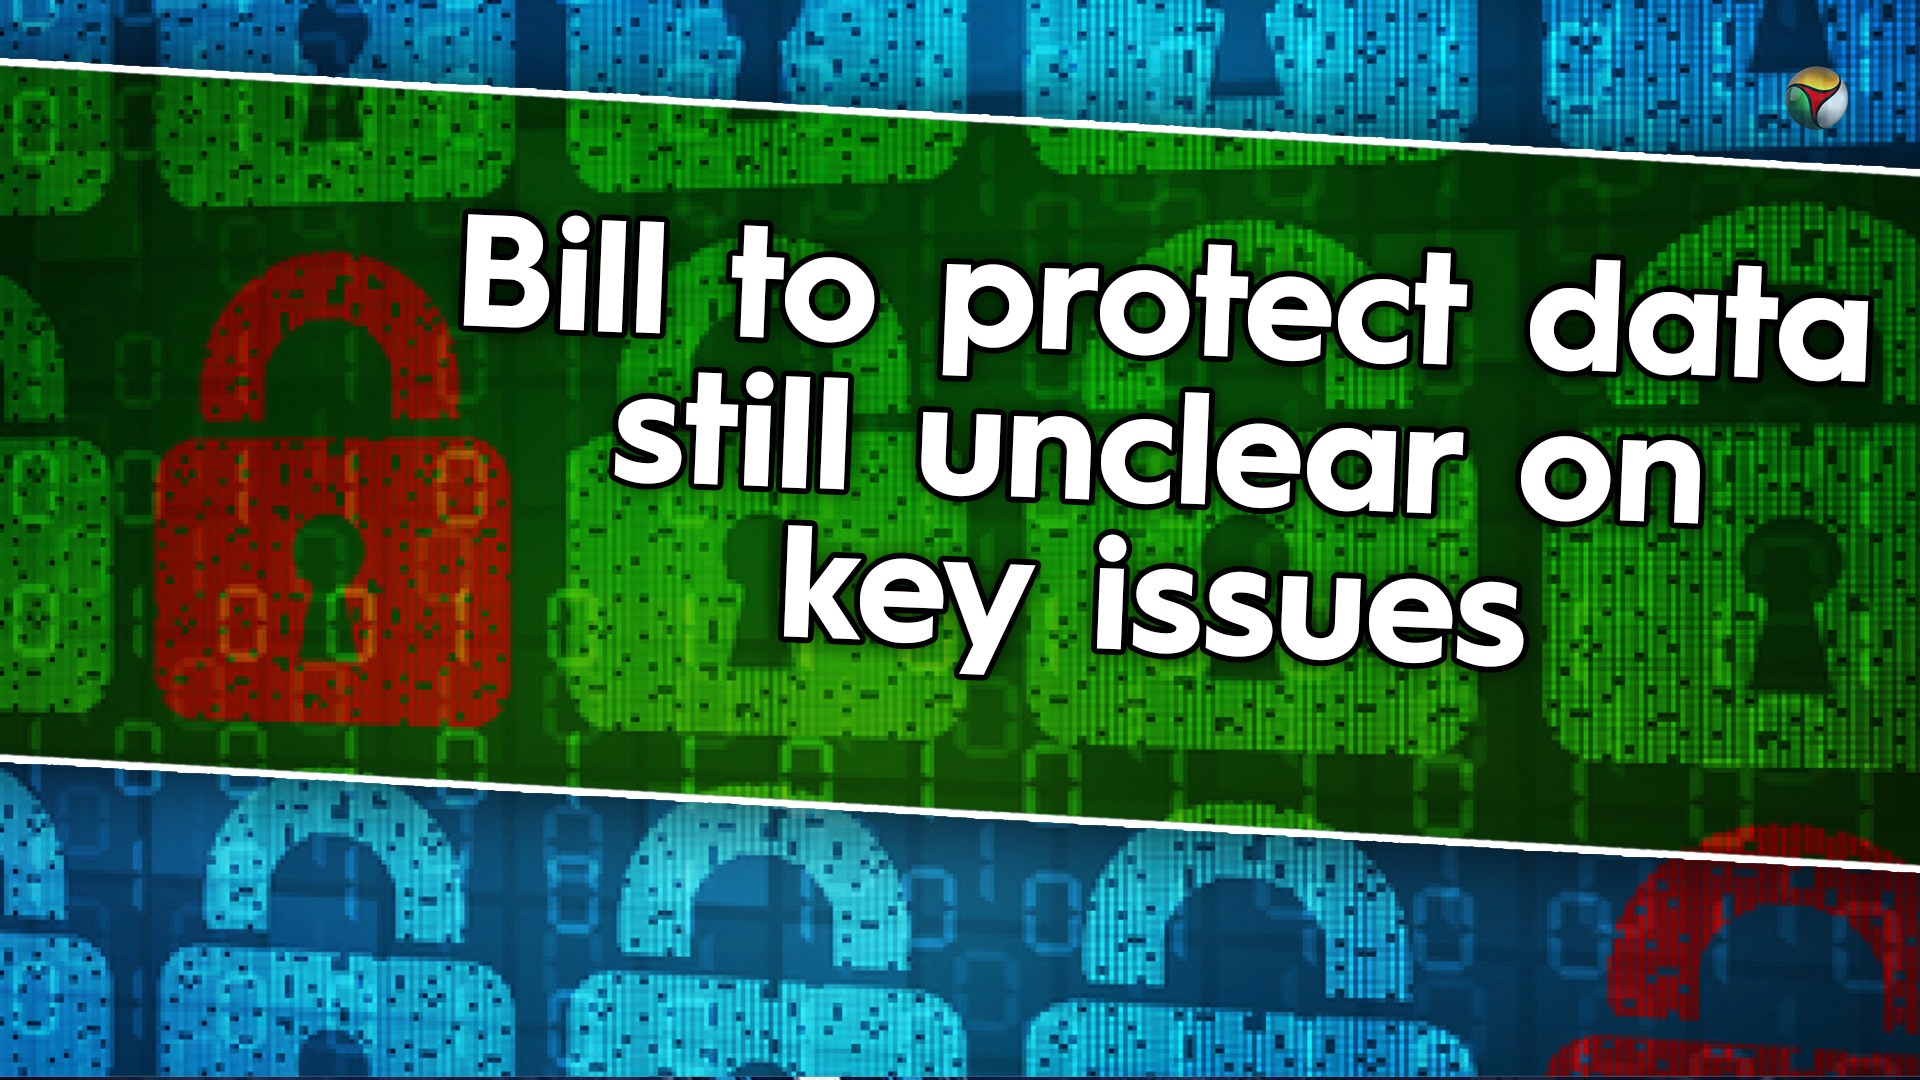 Bill to protect data still unclear on key issues